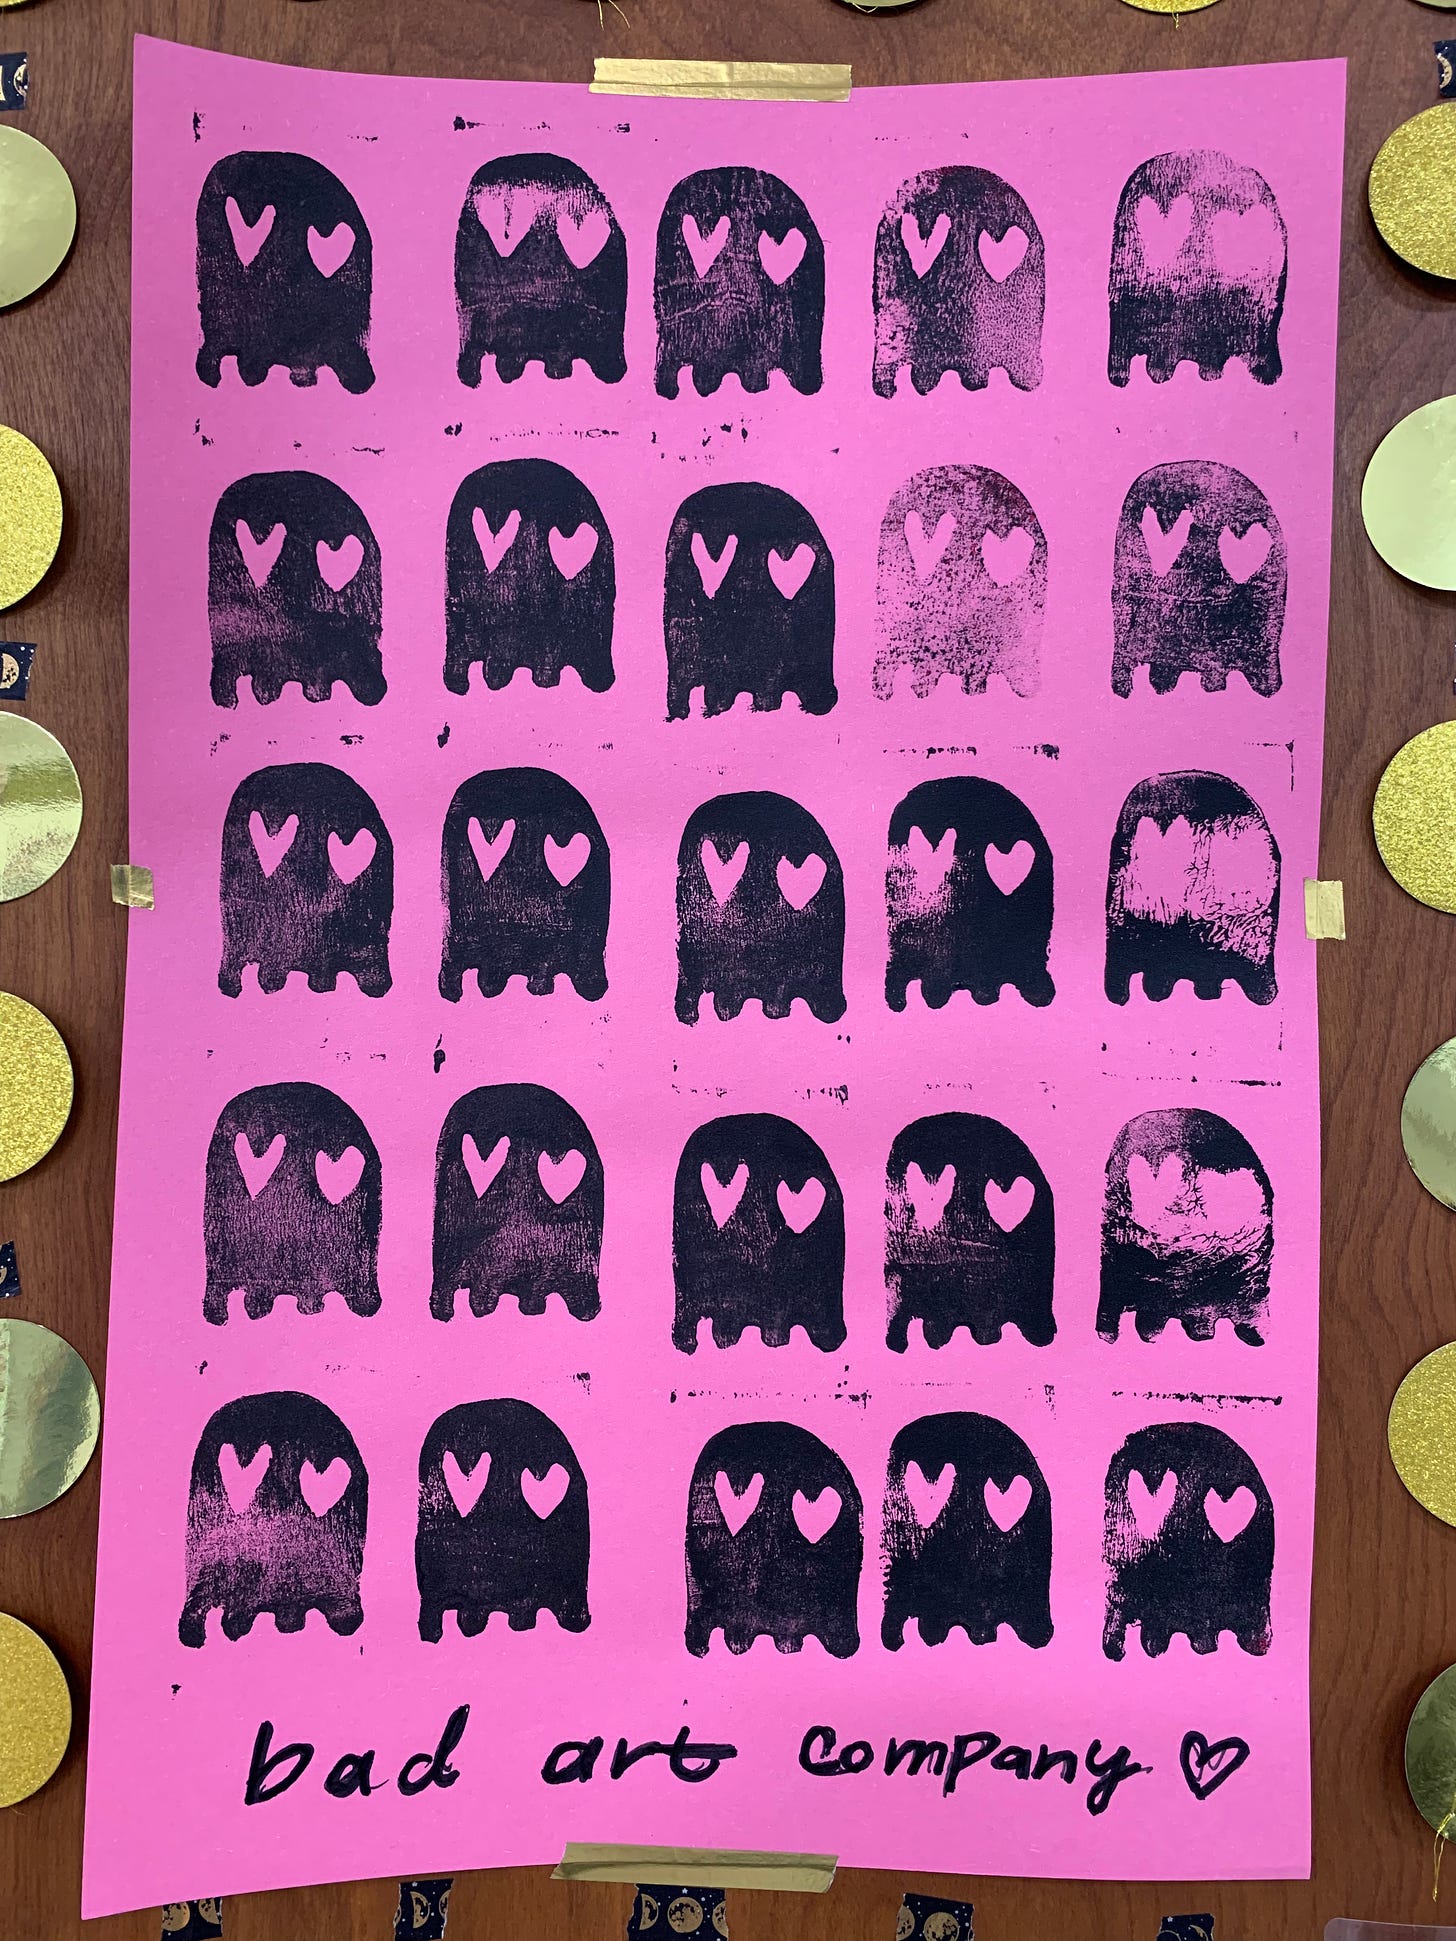 A pink poster with stamped black Pac-Man style ghosts with heart eyes on it.